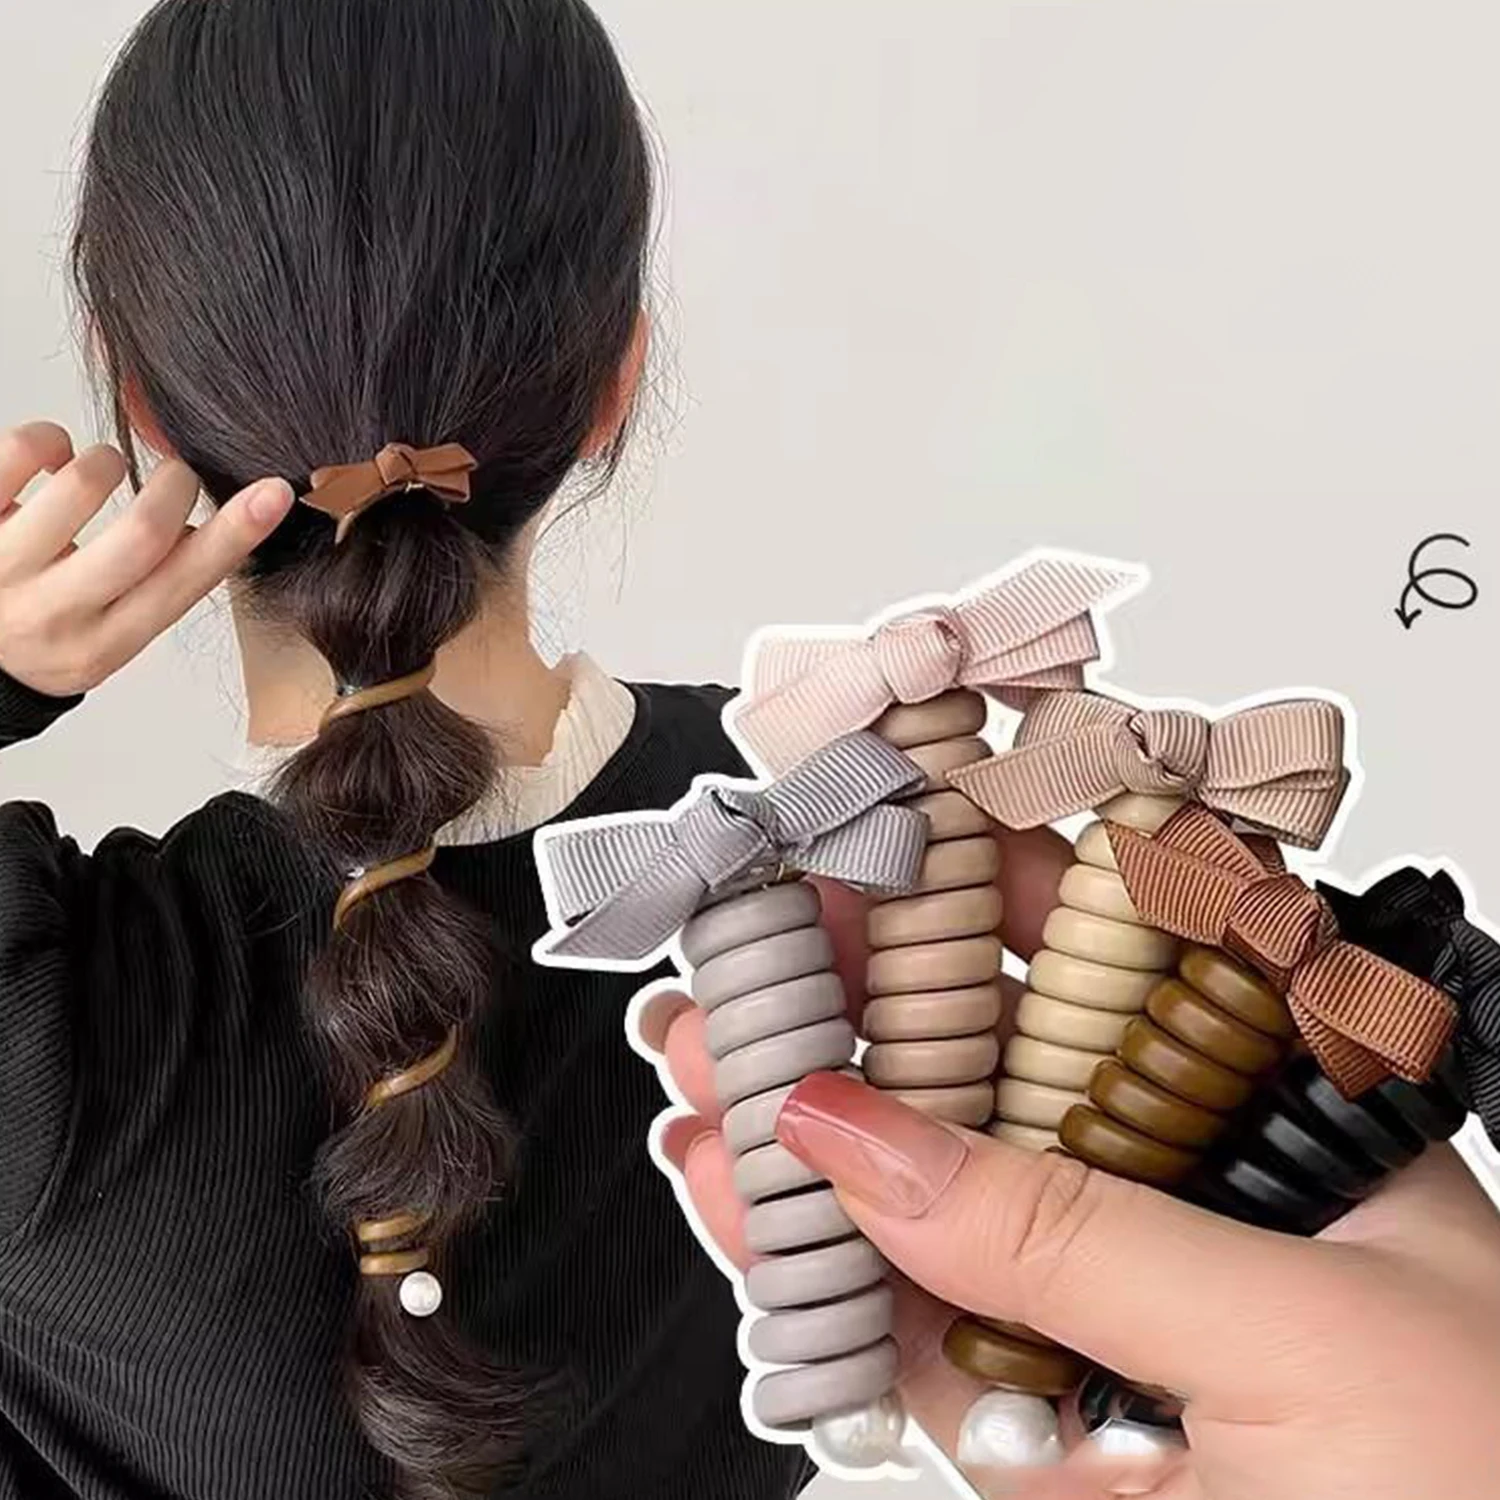 

1pcs Telephone Wire Hair Ties Women Girls Solid Color Bow Elastic Hair Bands Spiral Coil Rubber Bands Ponytails Hair Accessories